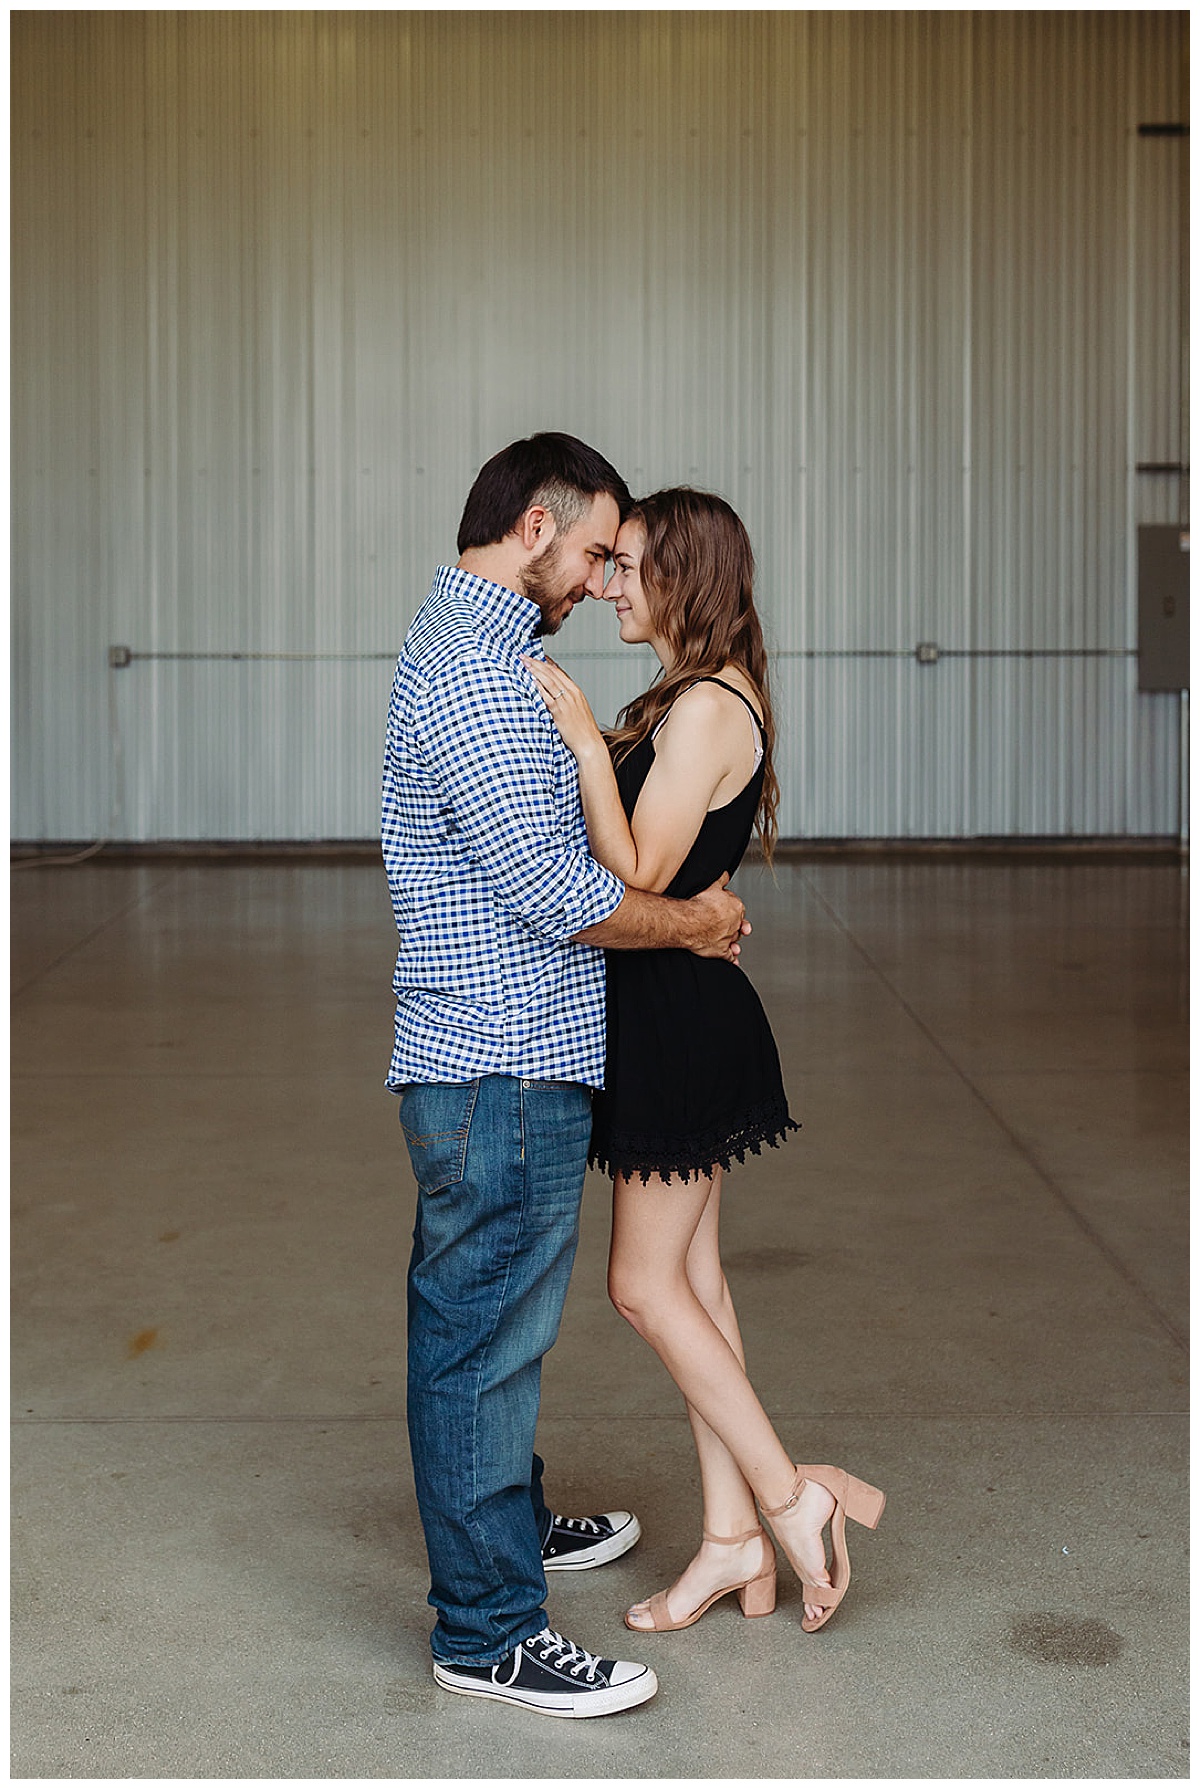 Man and woman cuddle in close together for Kayla Bouren Photography